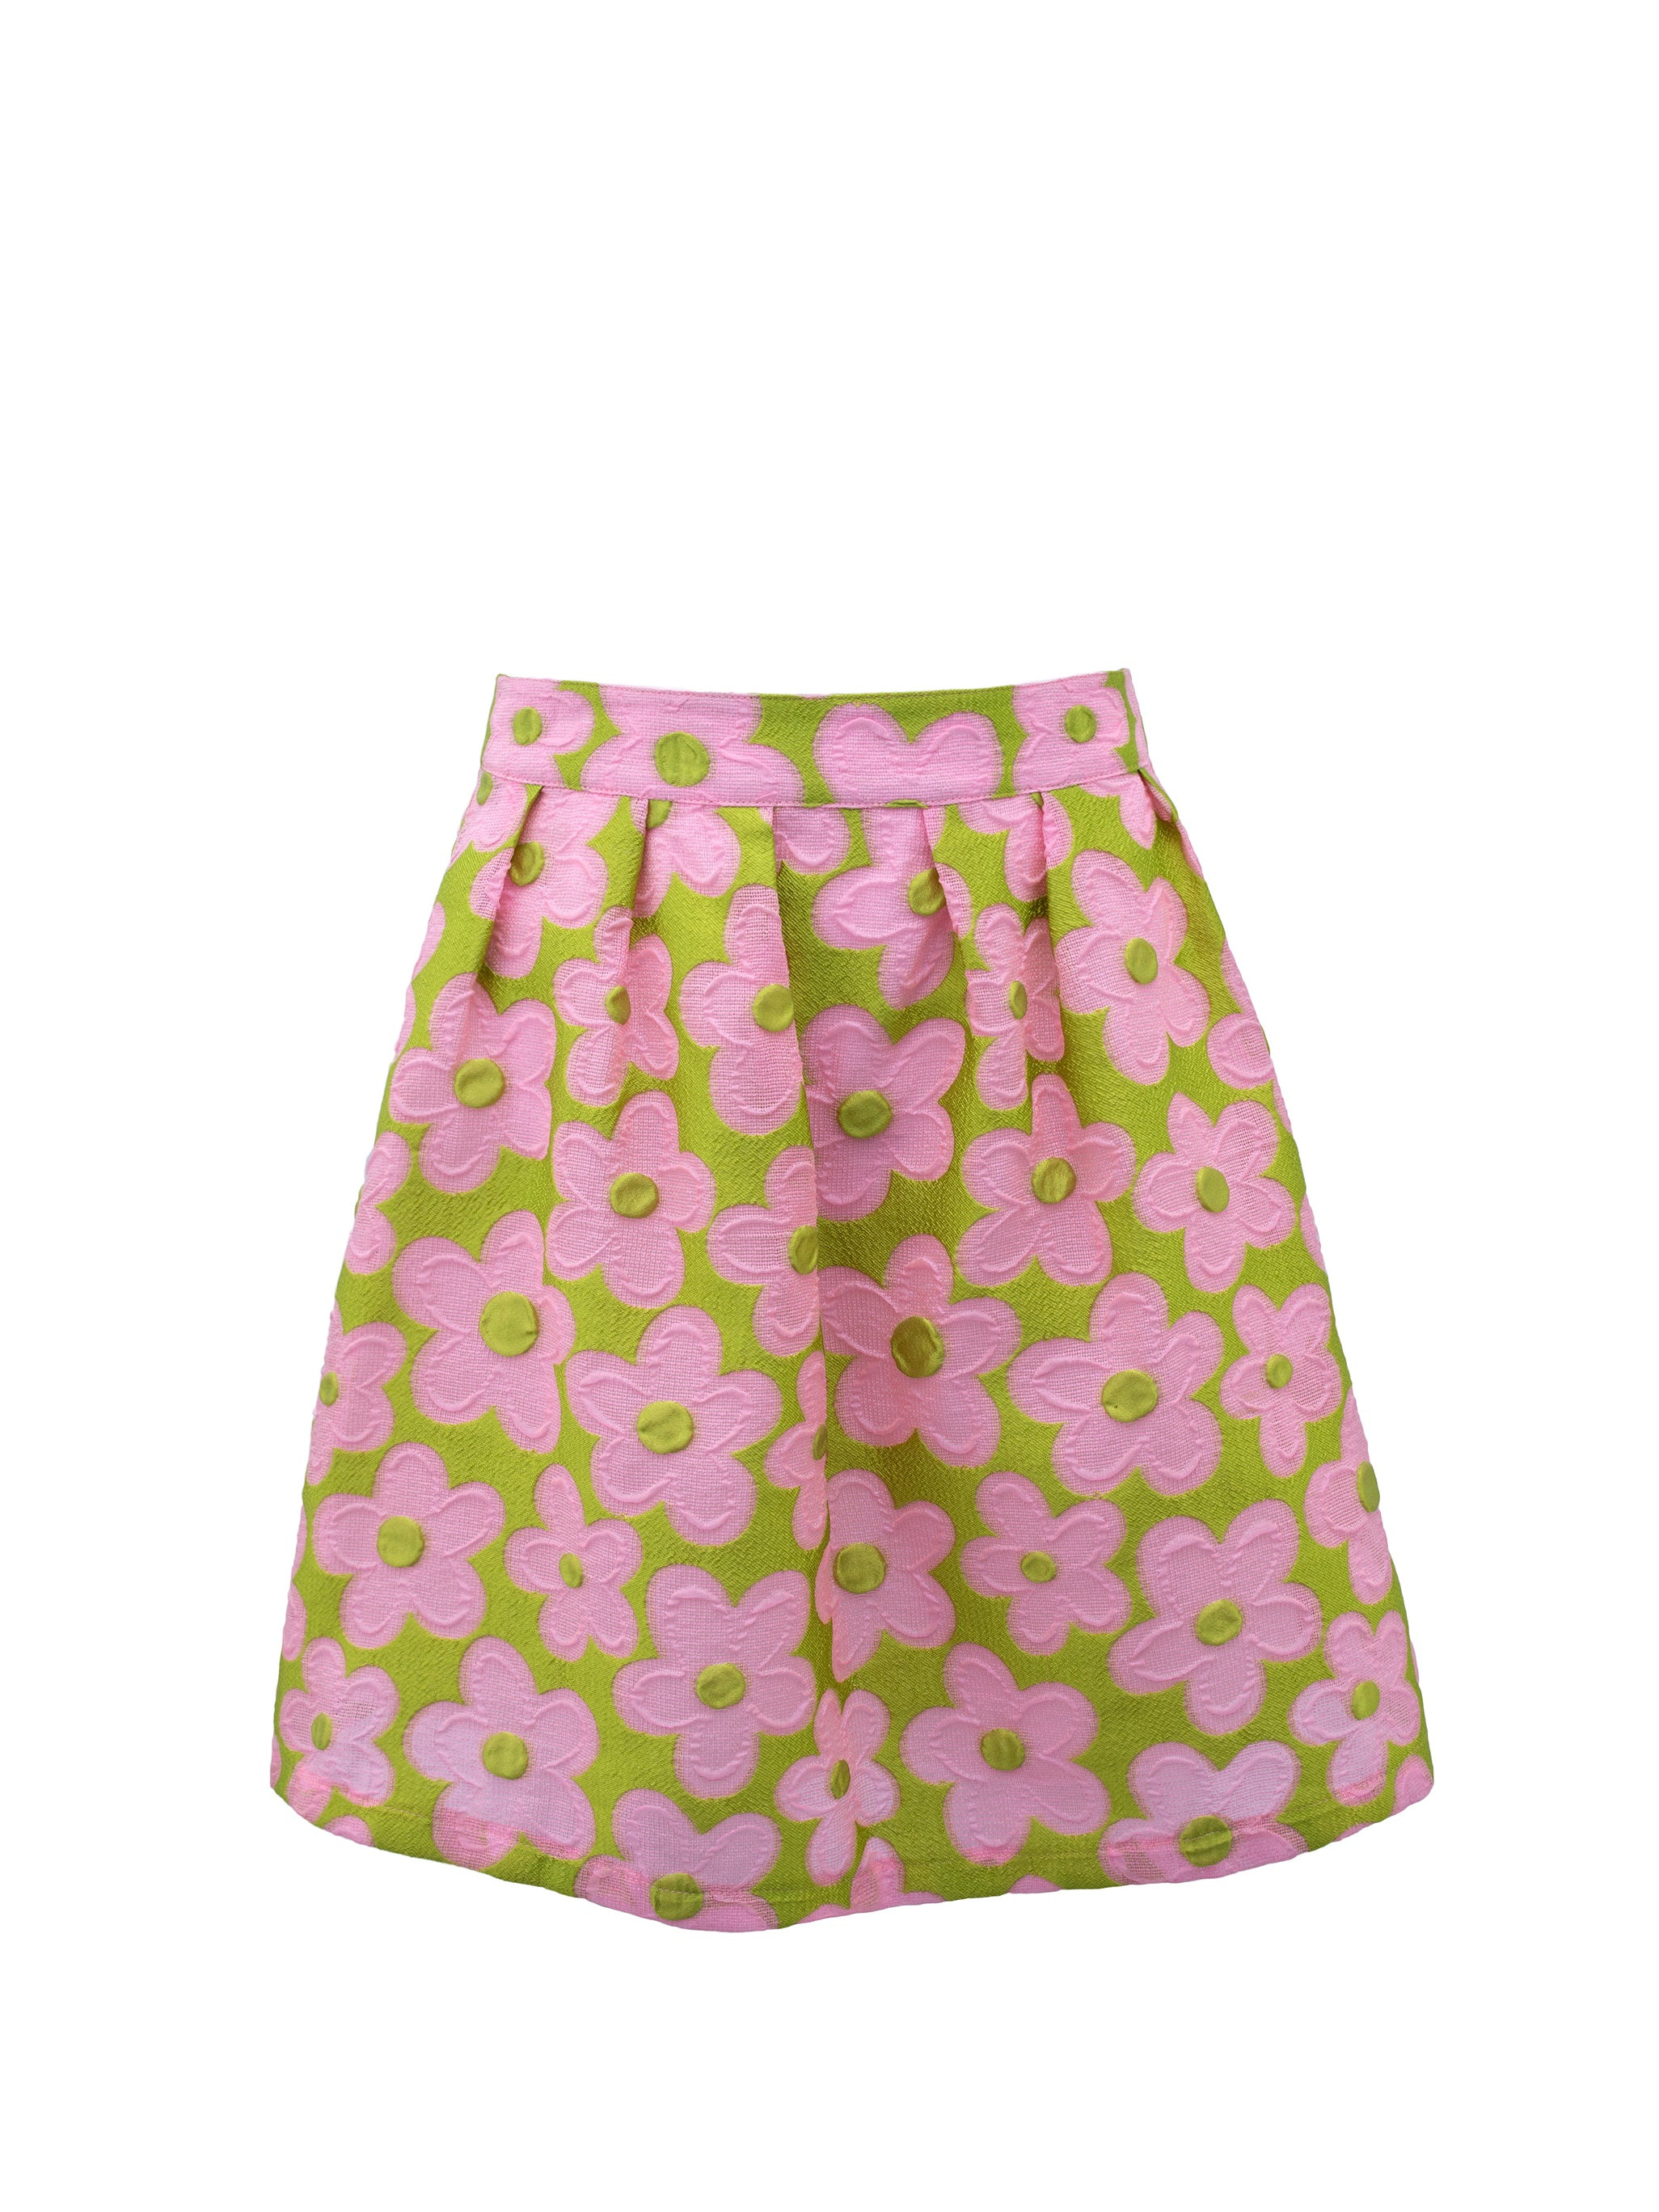 PINK & LIME DAISY EMBROIDERED SKIRT